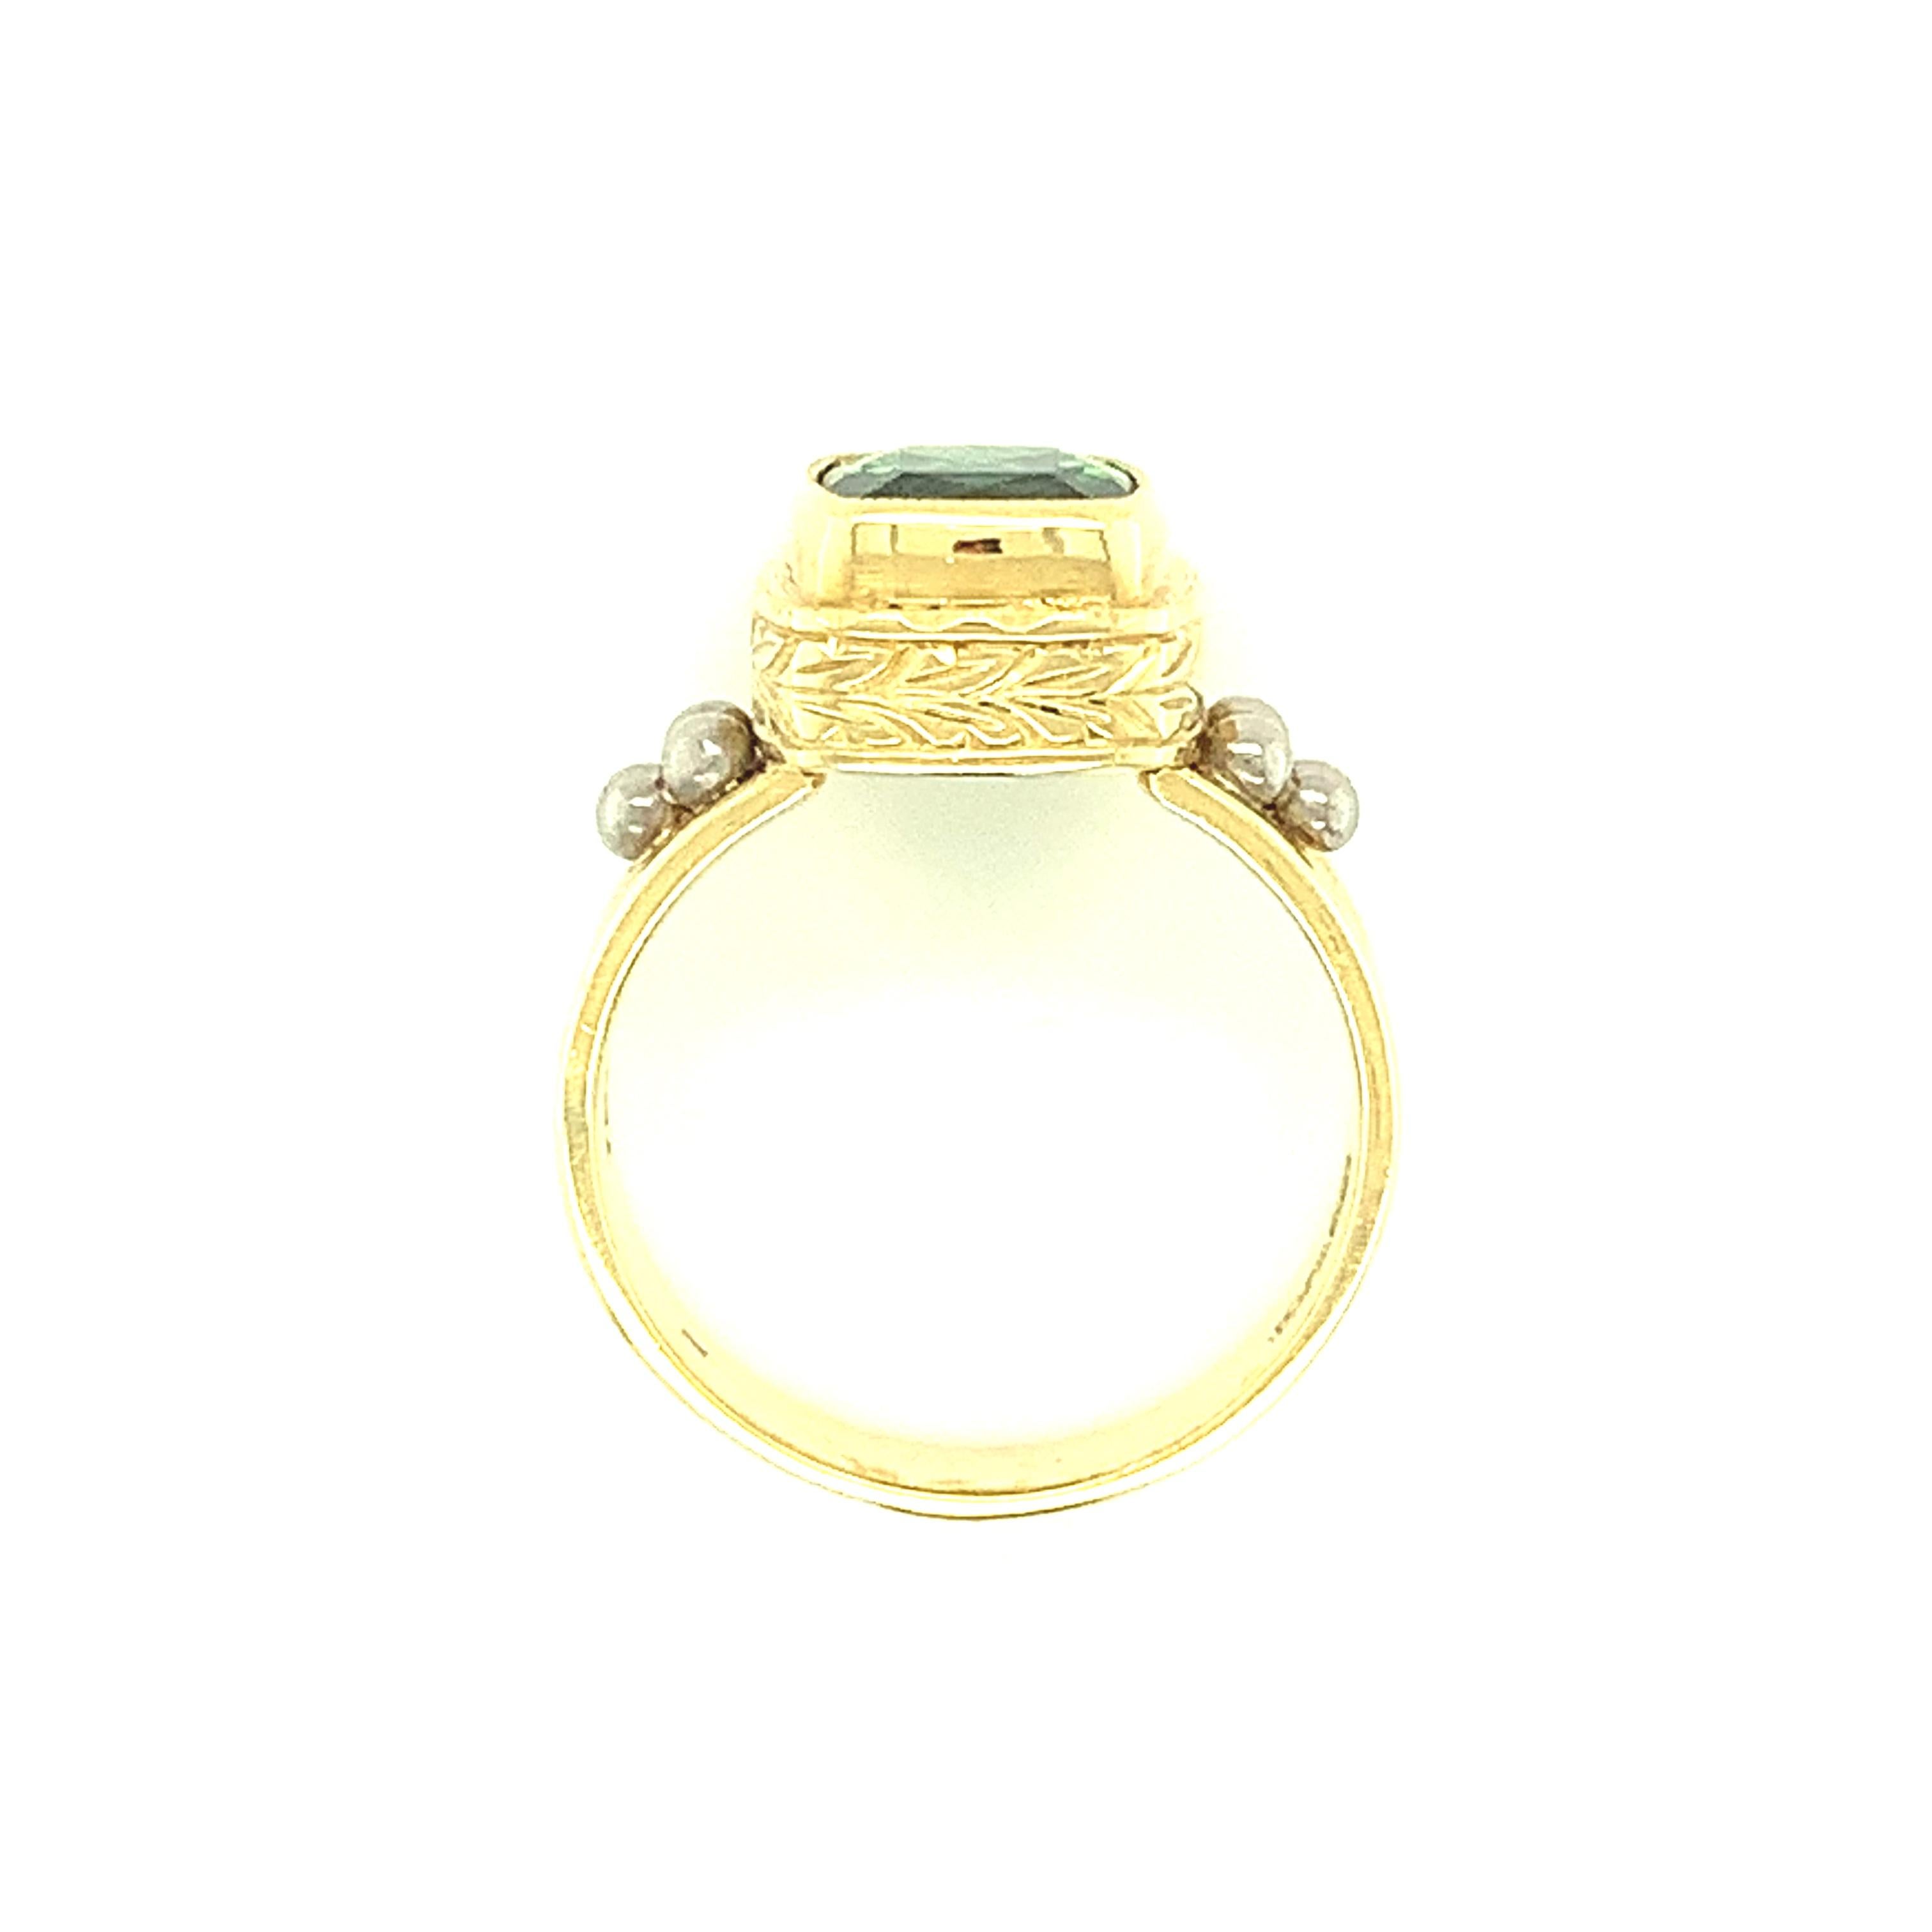 Green Tourmaline and Handmade 18k Yellow Gold Band Ring, 1.83 Carats For Sale 3